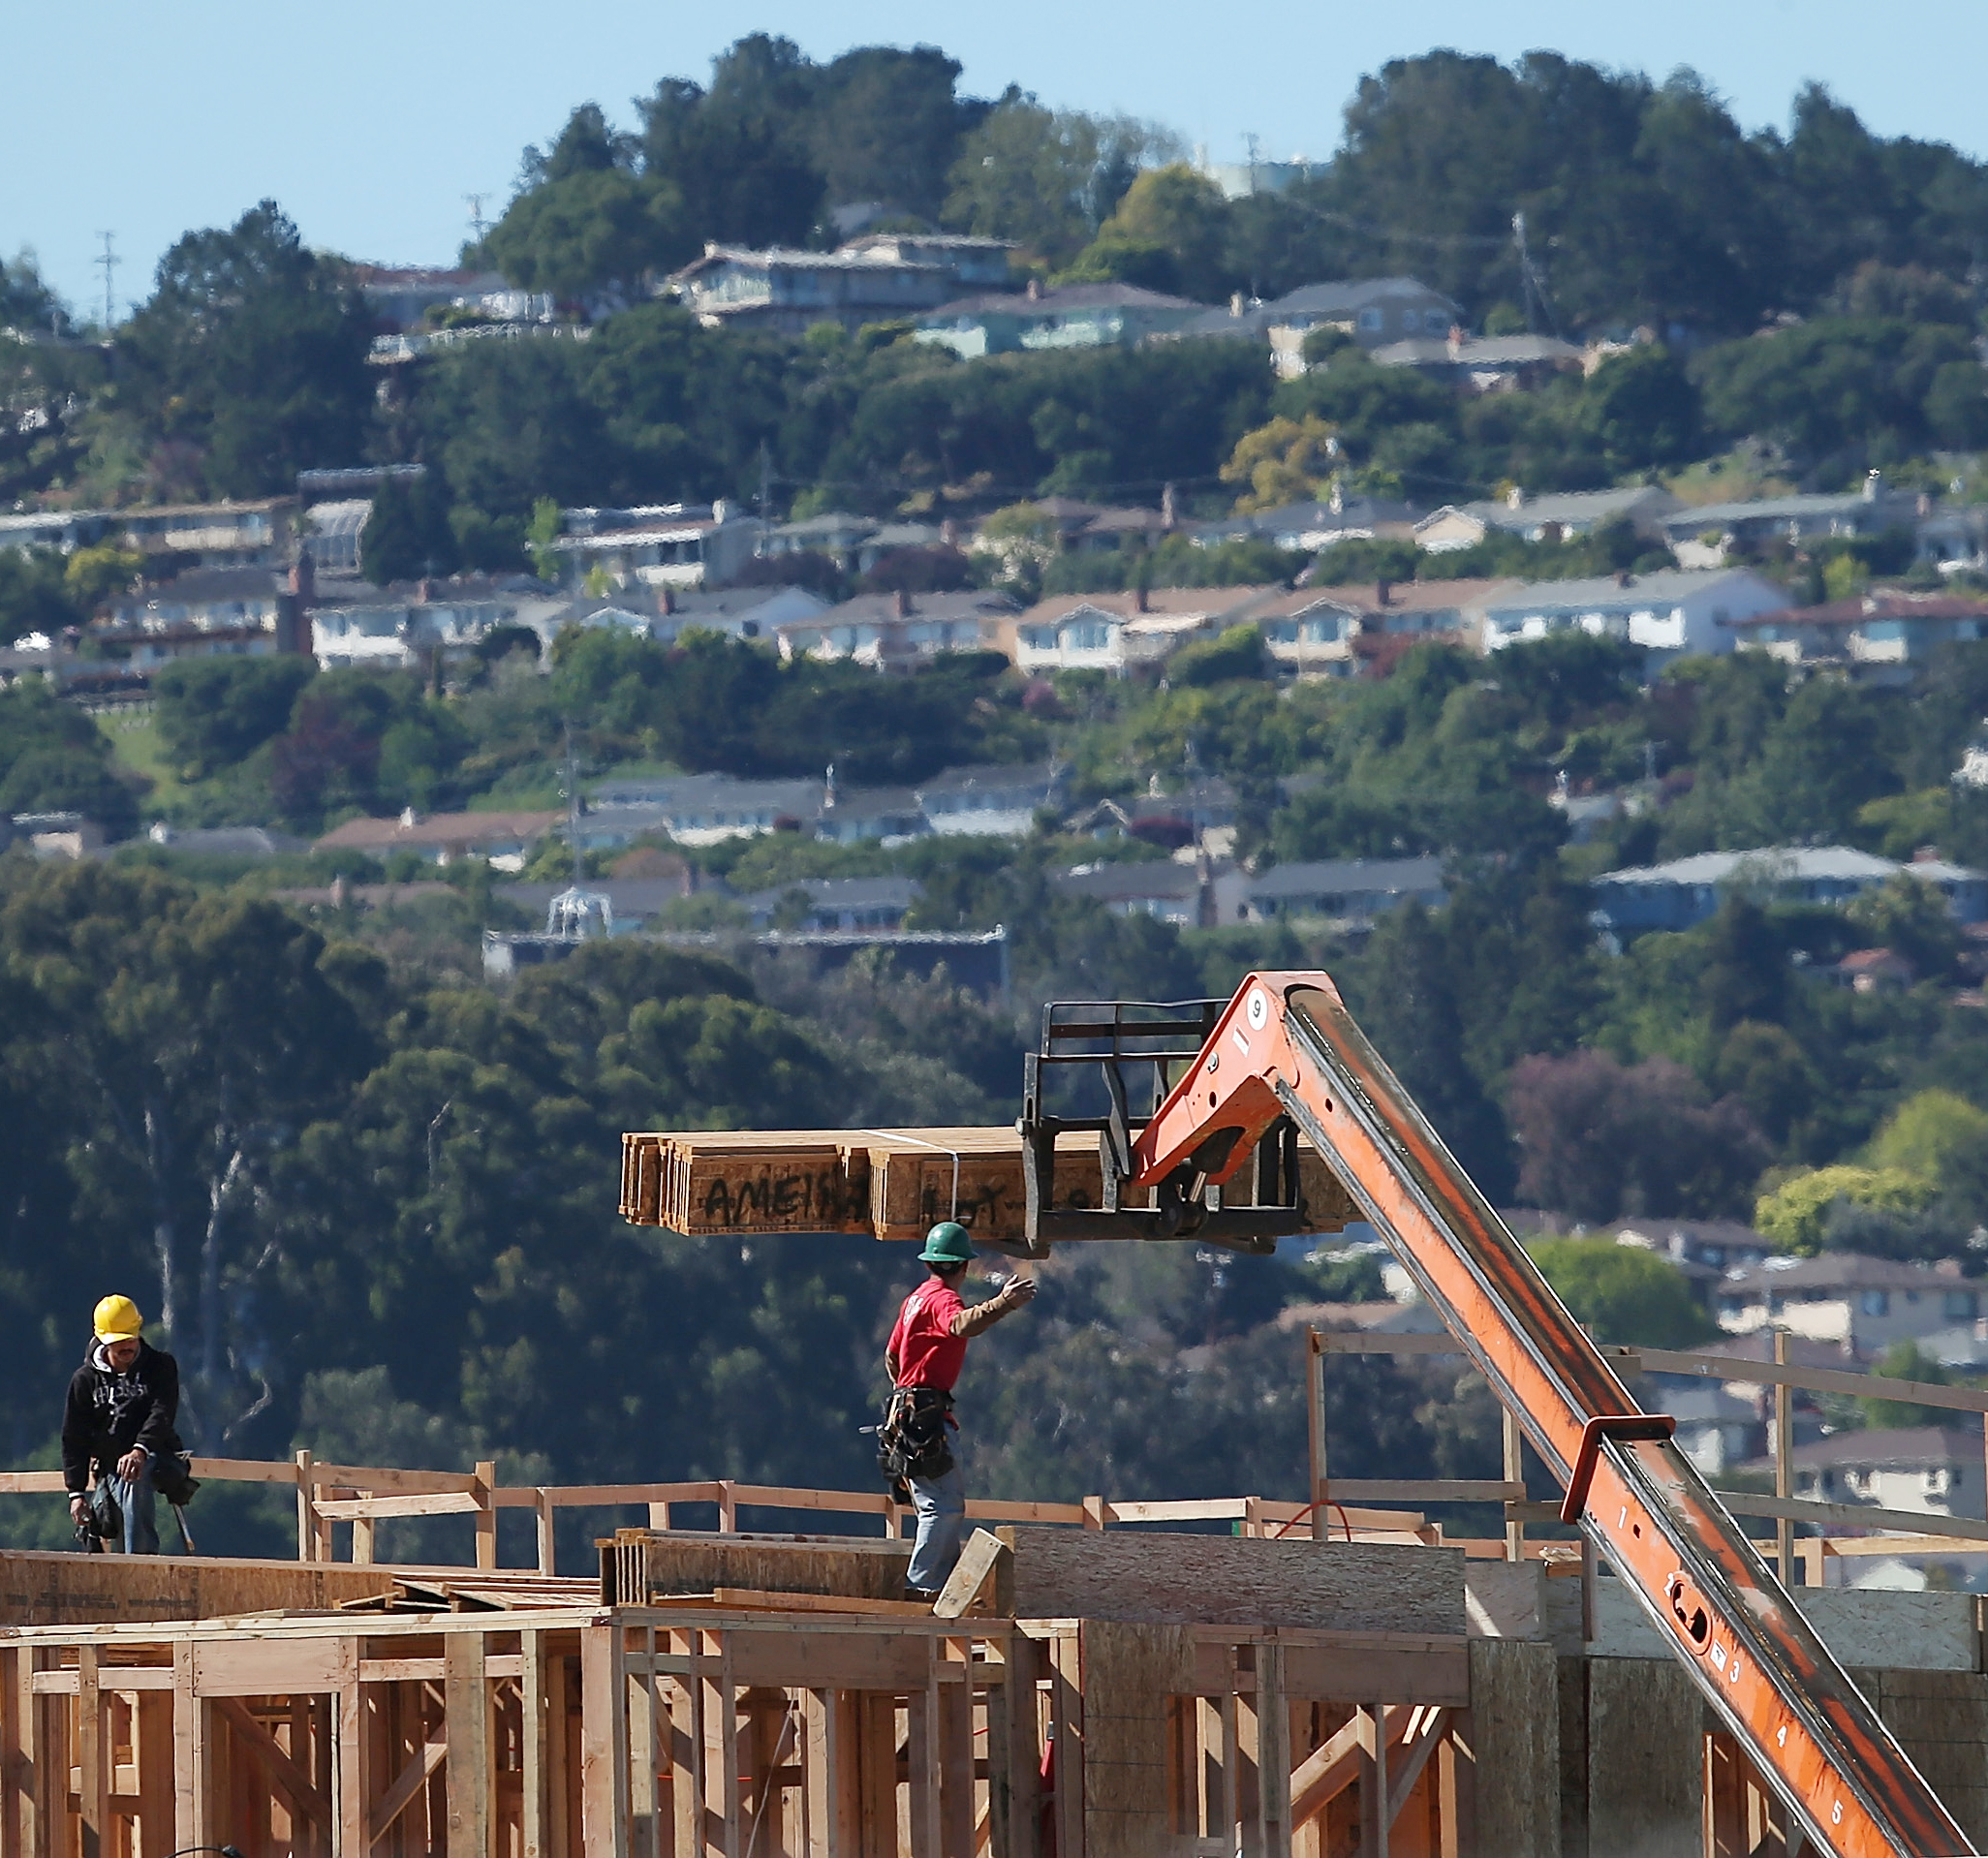 Two construction workers in helmets are on a wooden building frame. One directs a crane lifting a beam, while a hilly residential area is visible in the background.